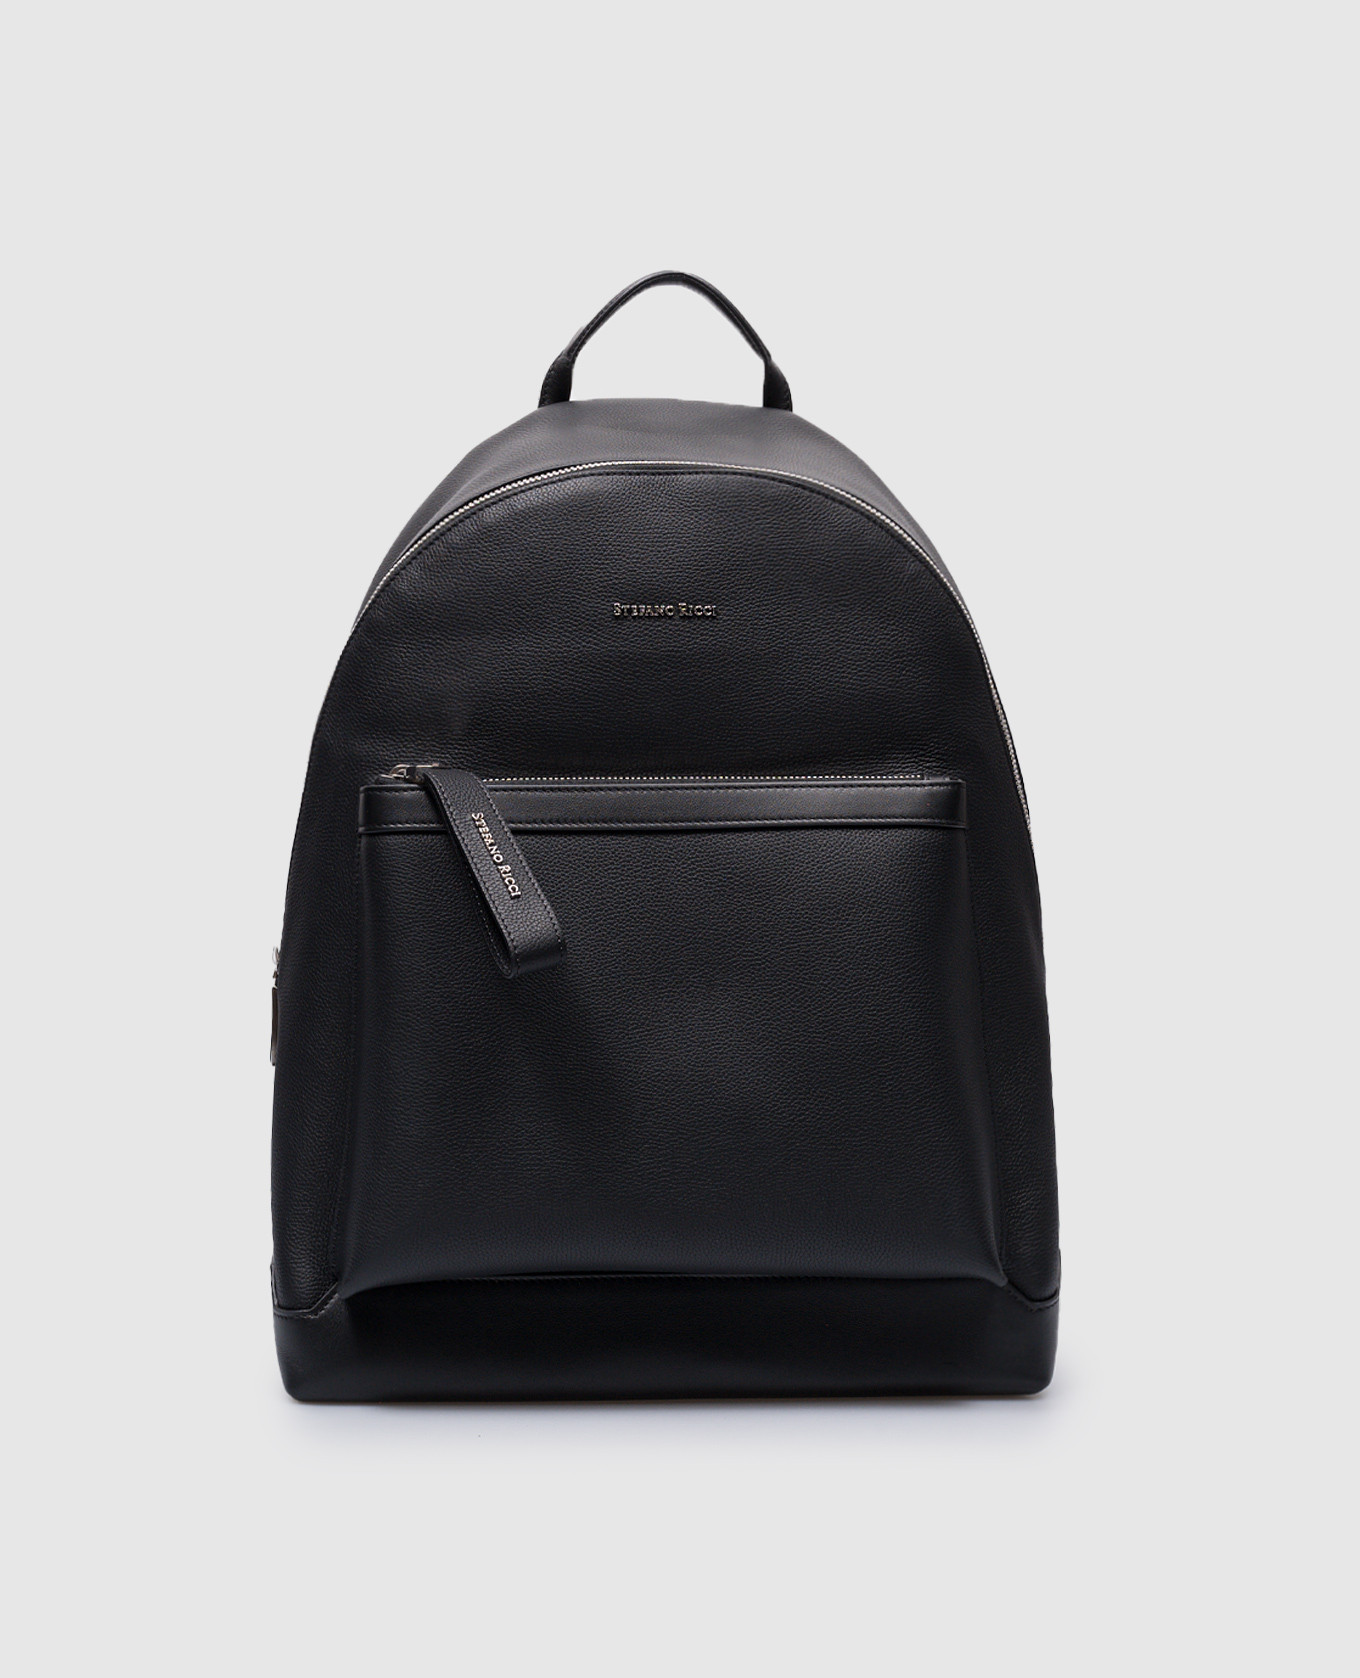 Black leather backpack with metal logo